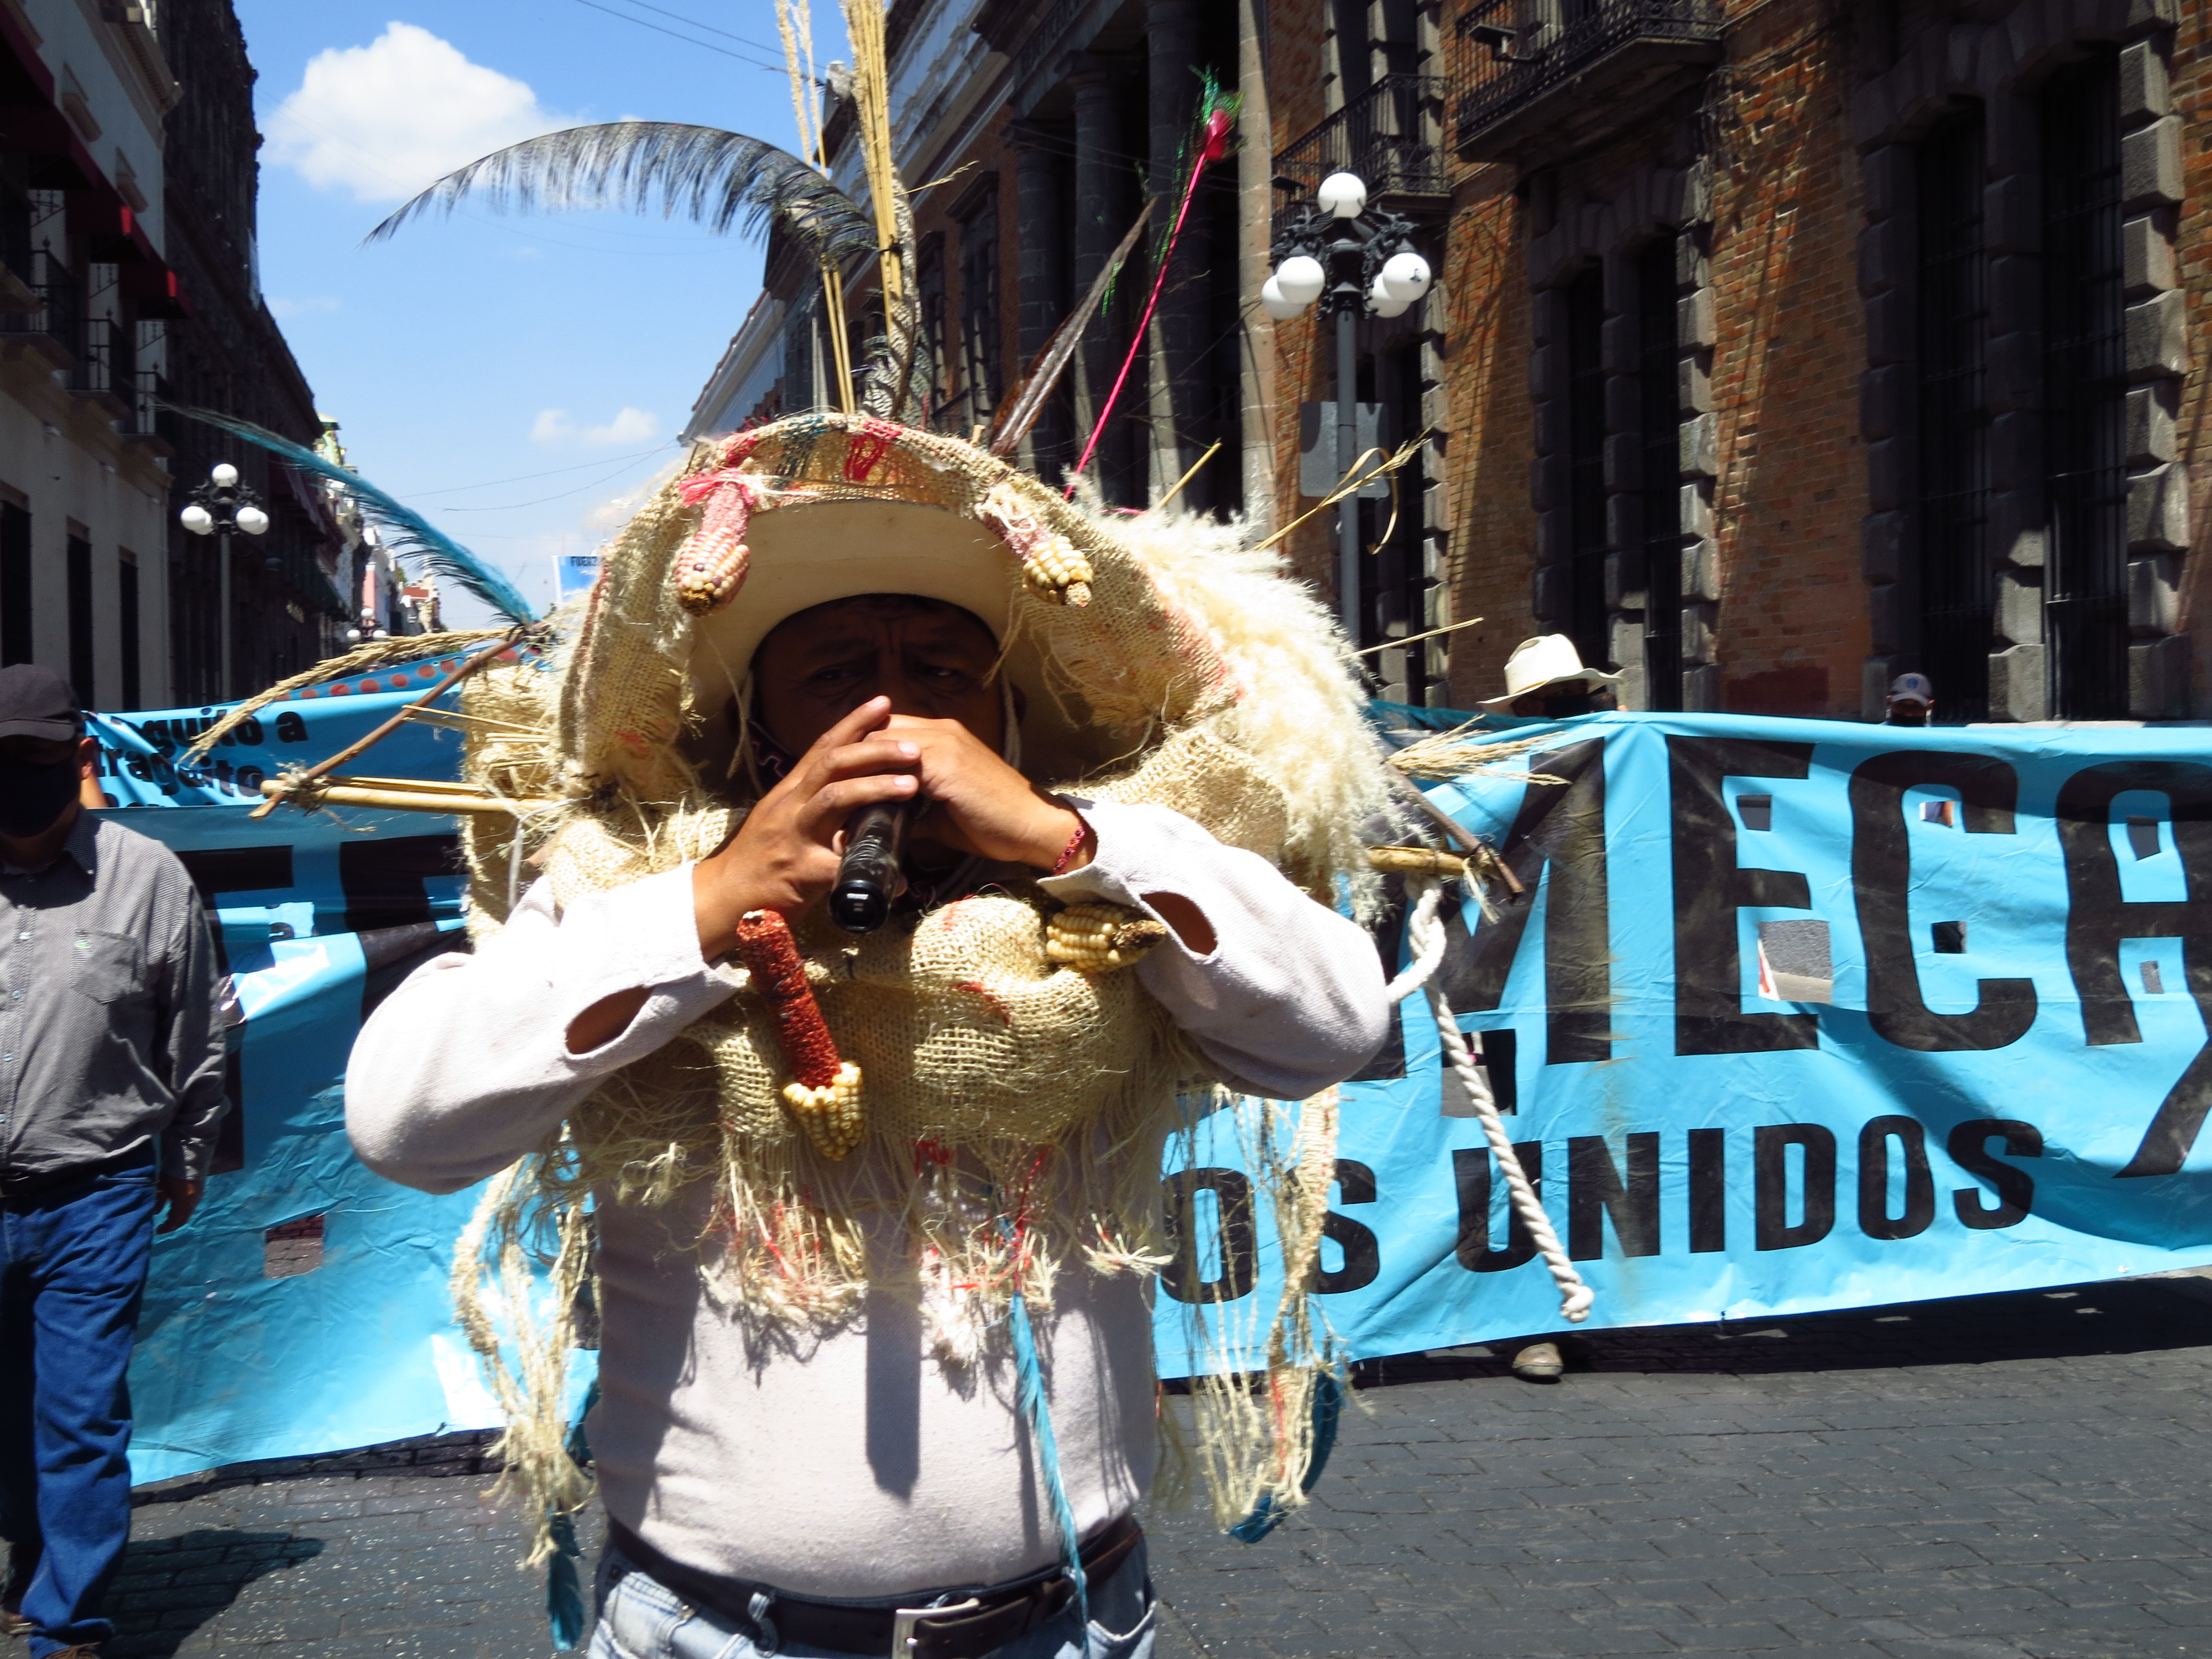 The convoy marches through Puebla city to protest outside the state parliament